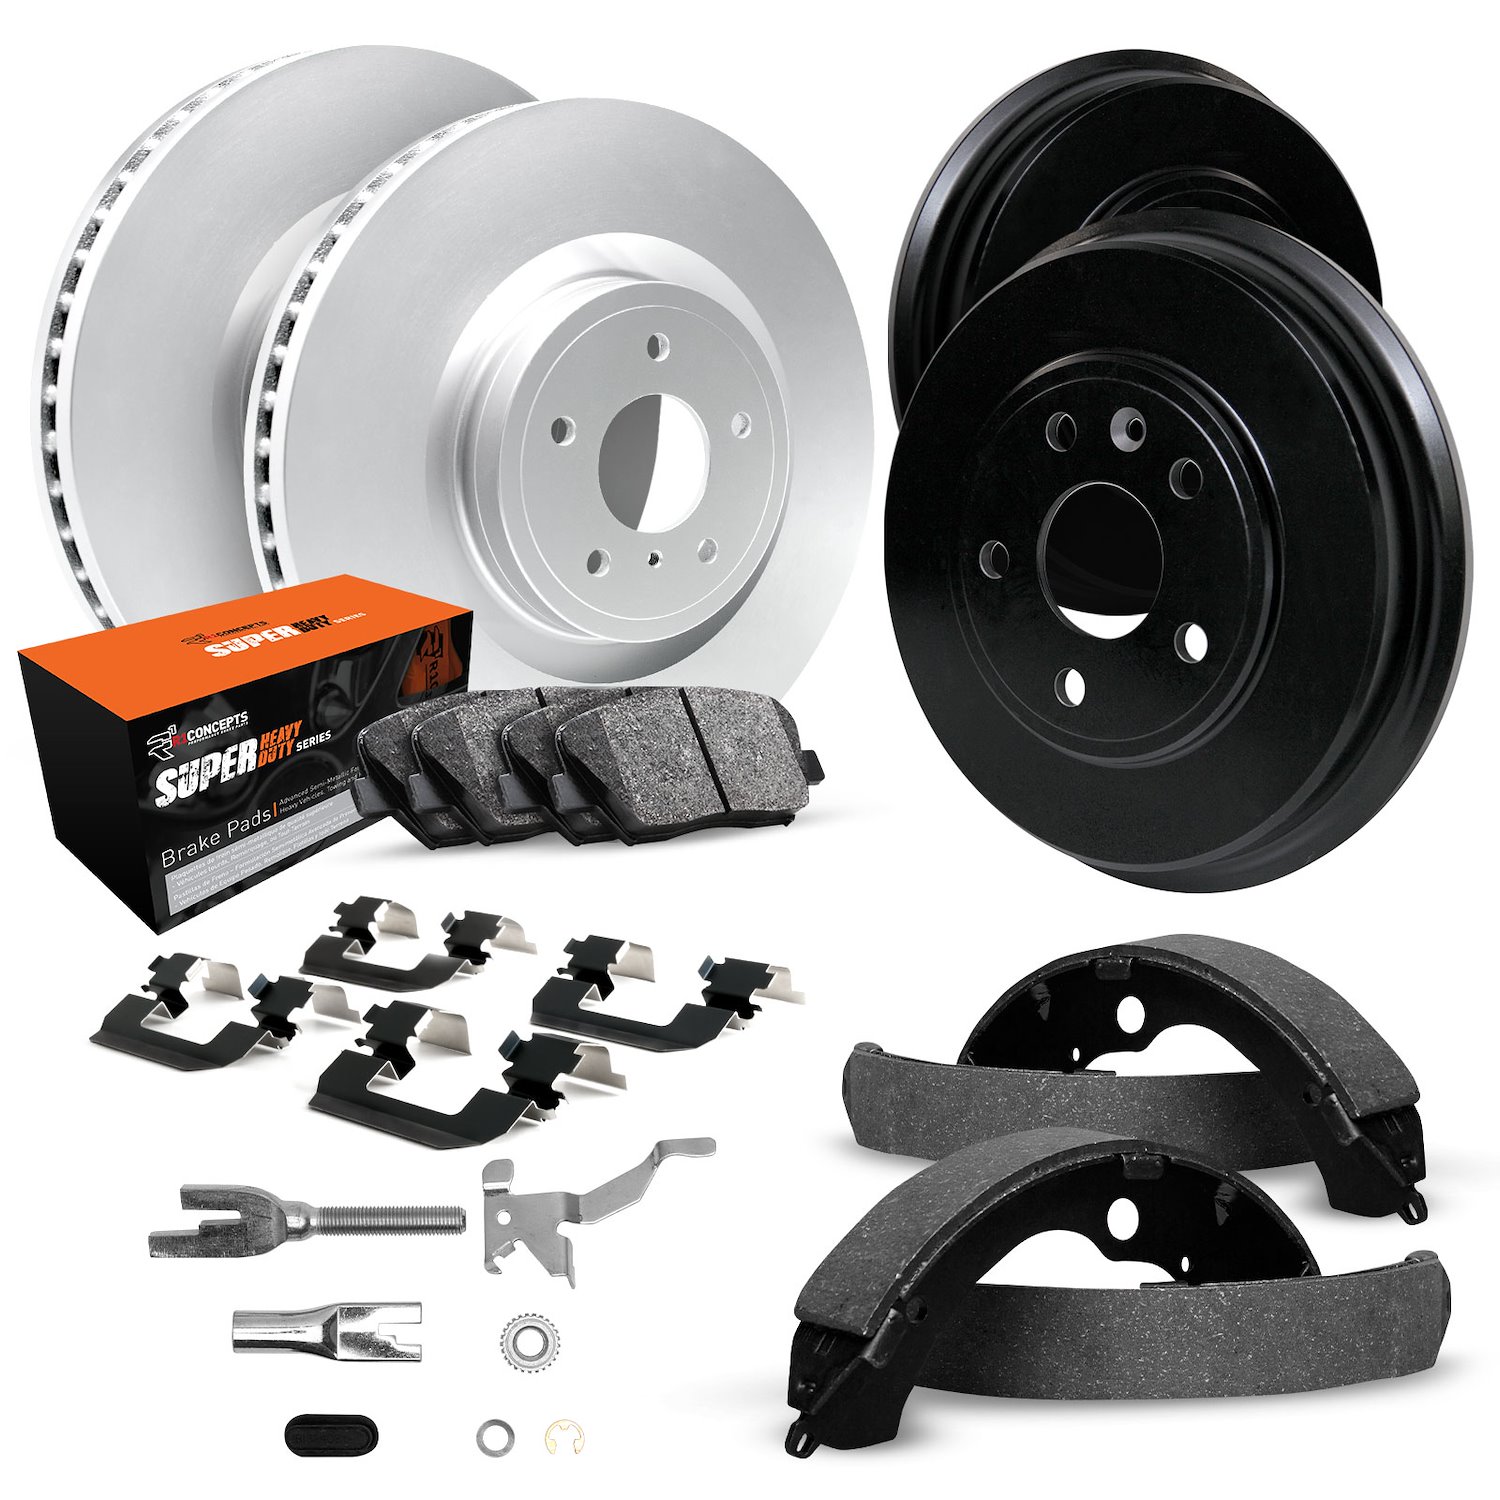 GEO-Carbon Brake Rotor & Drum Set w/Super-Duty Pads, Shoes, Hardware/Adjusters, 1990-2000 GM, Position: Front & Rear